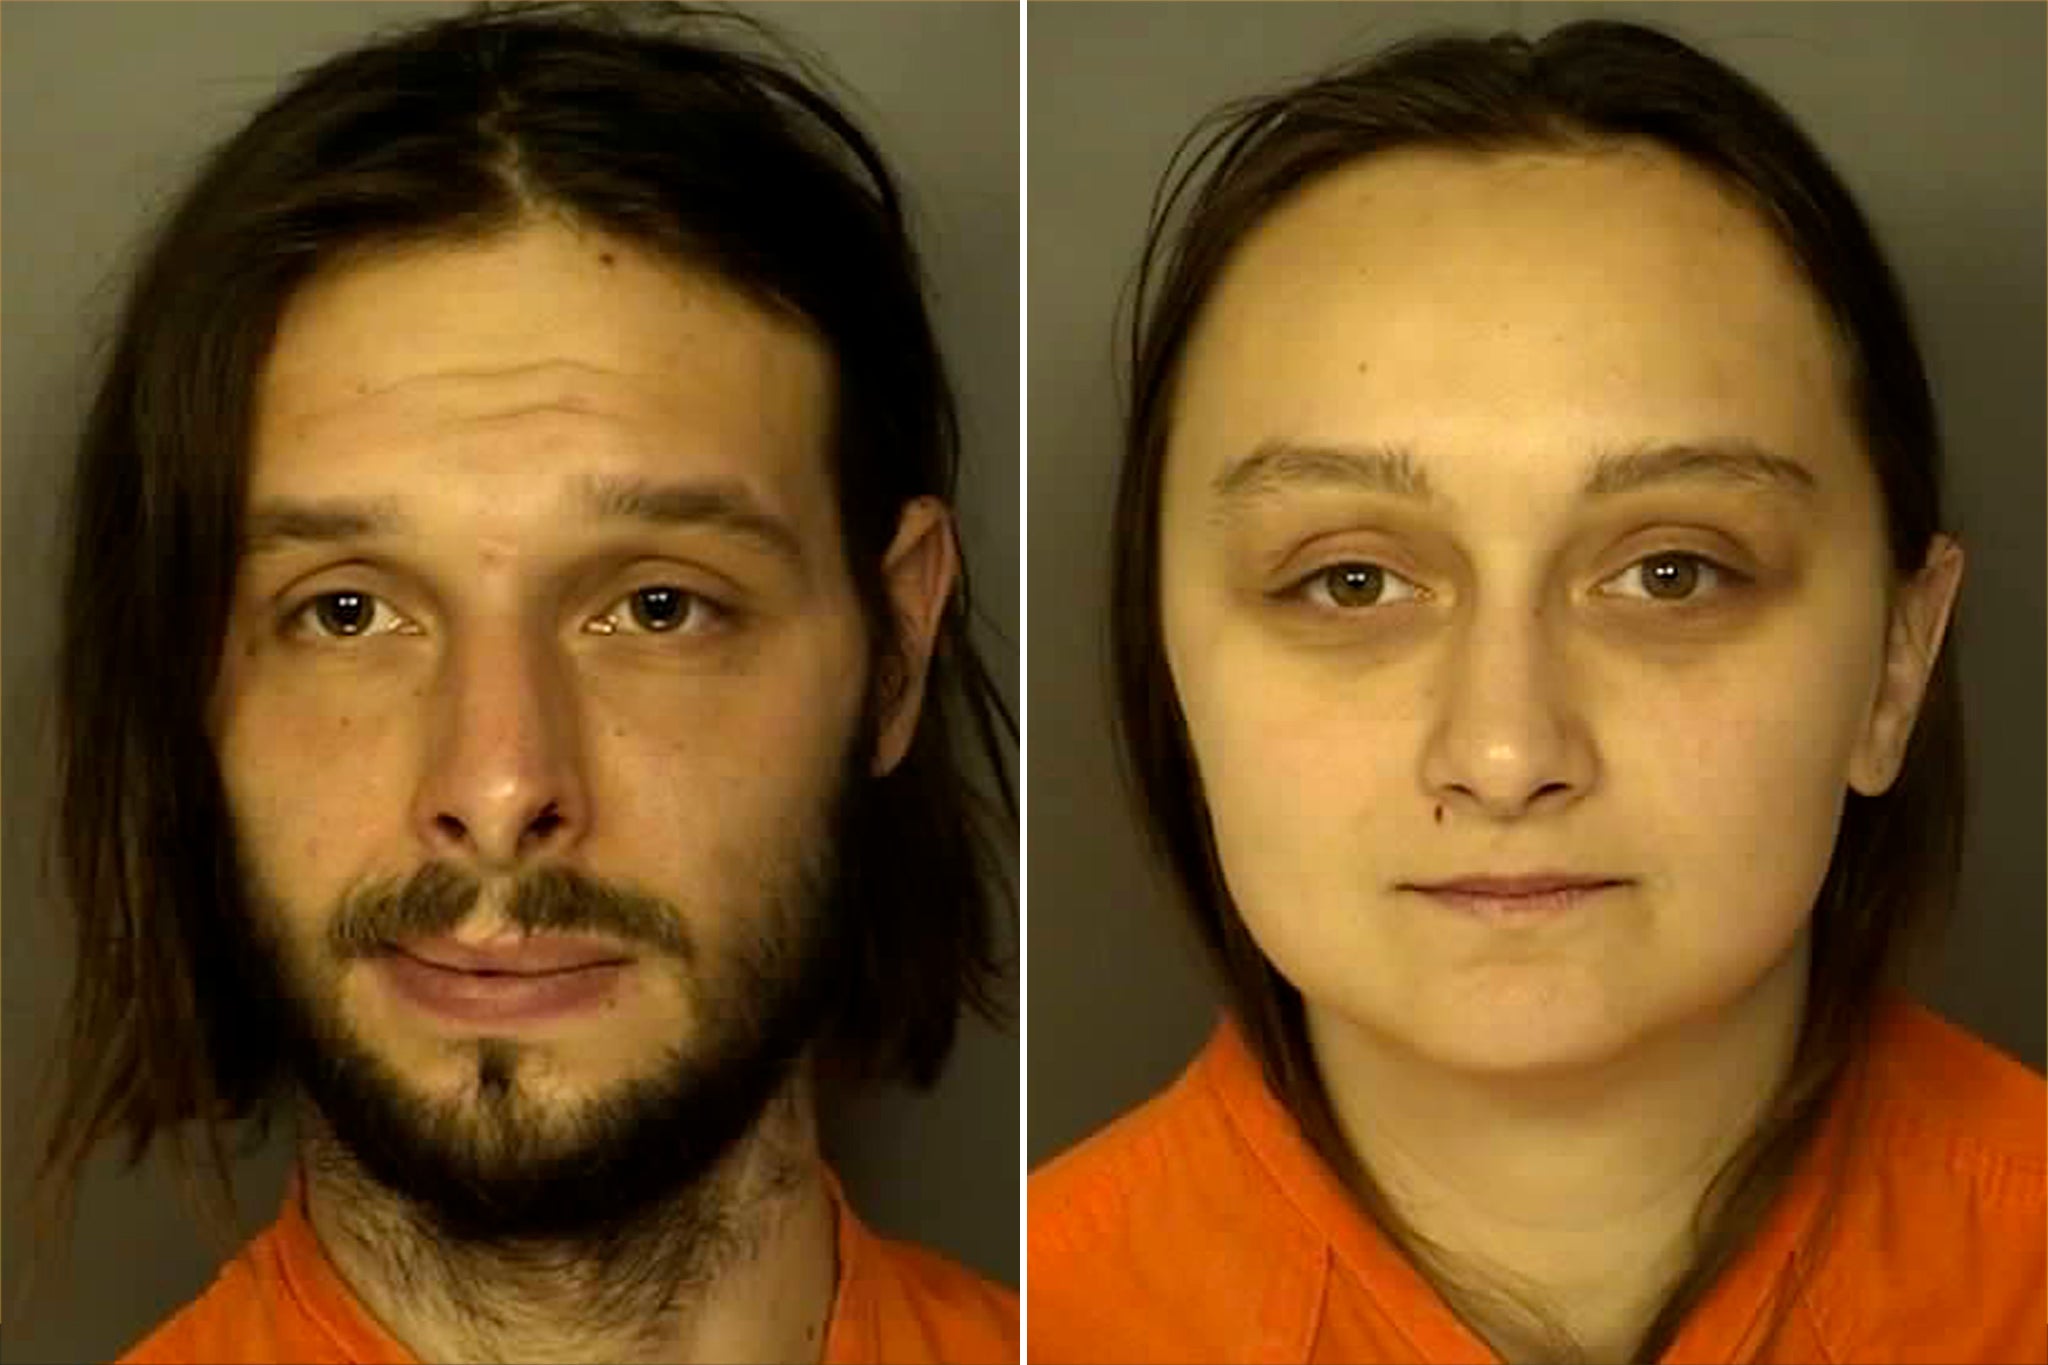 Worden Butler, 28, and Alexis Hartnett, 27, allegedly ‘harassed and stalked the victims with racially motivated words and actions’